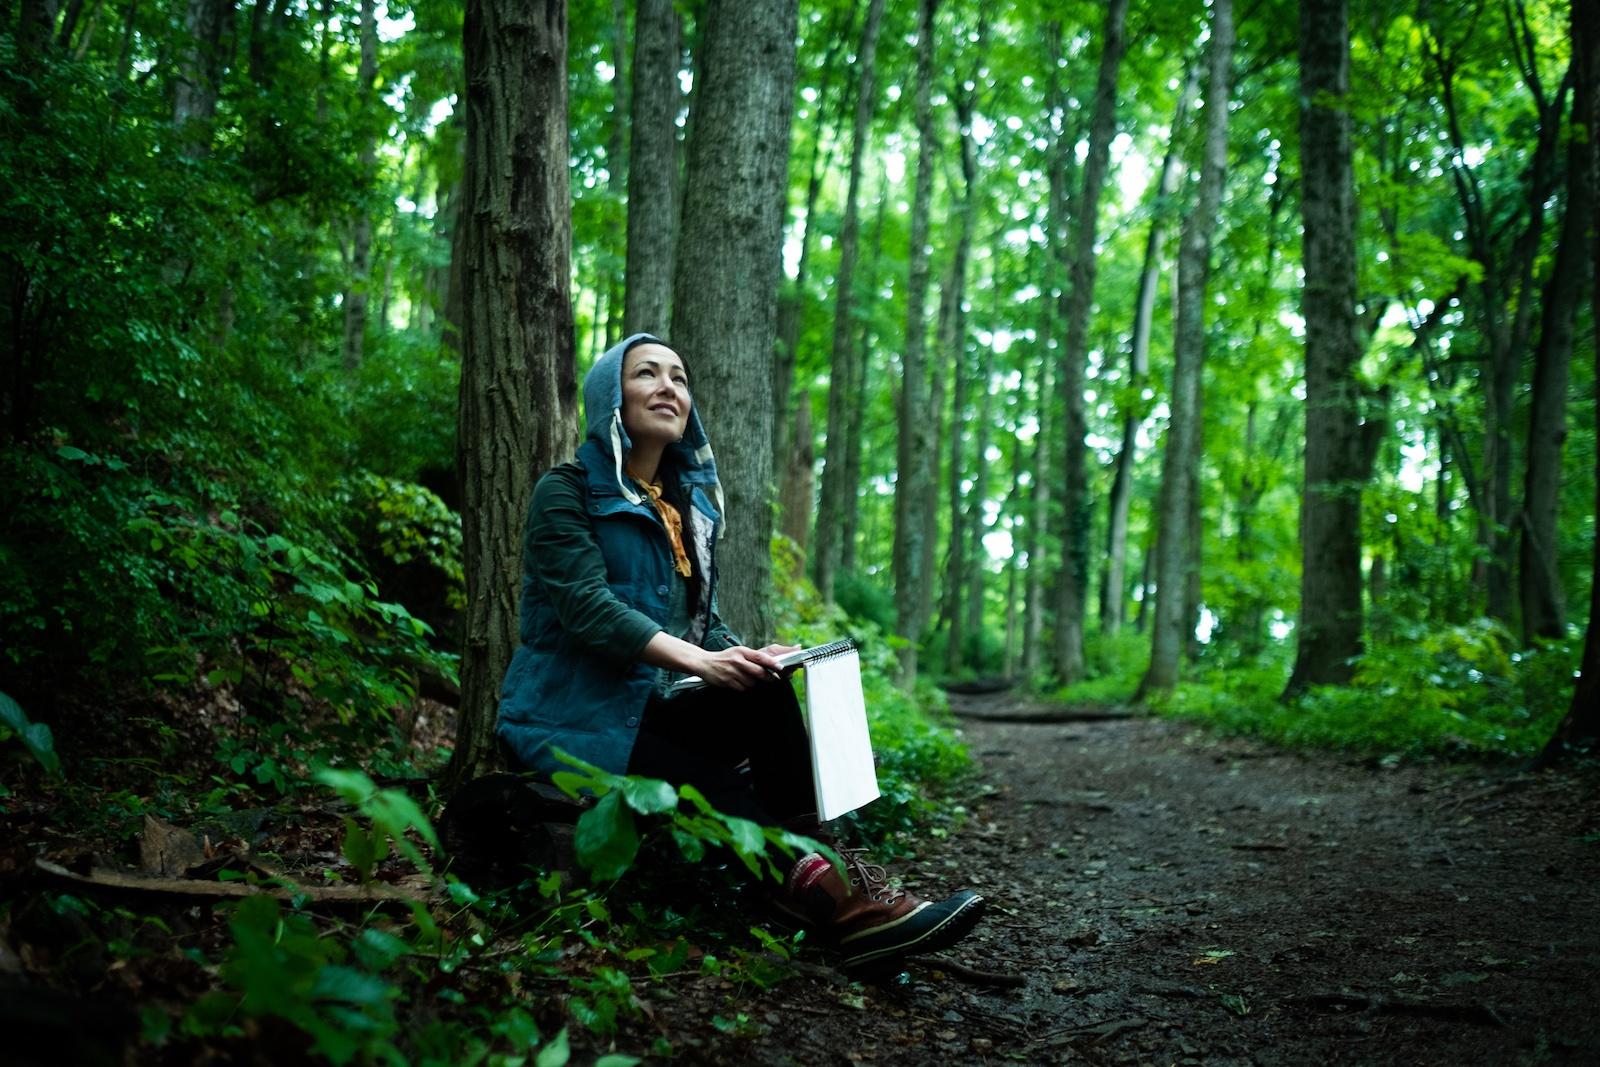 Woman sketches in her journal in the woods